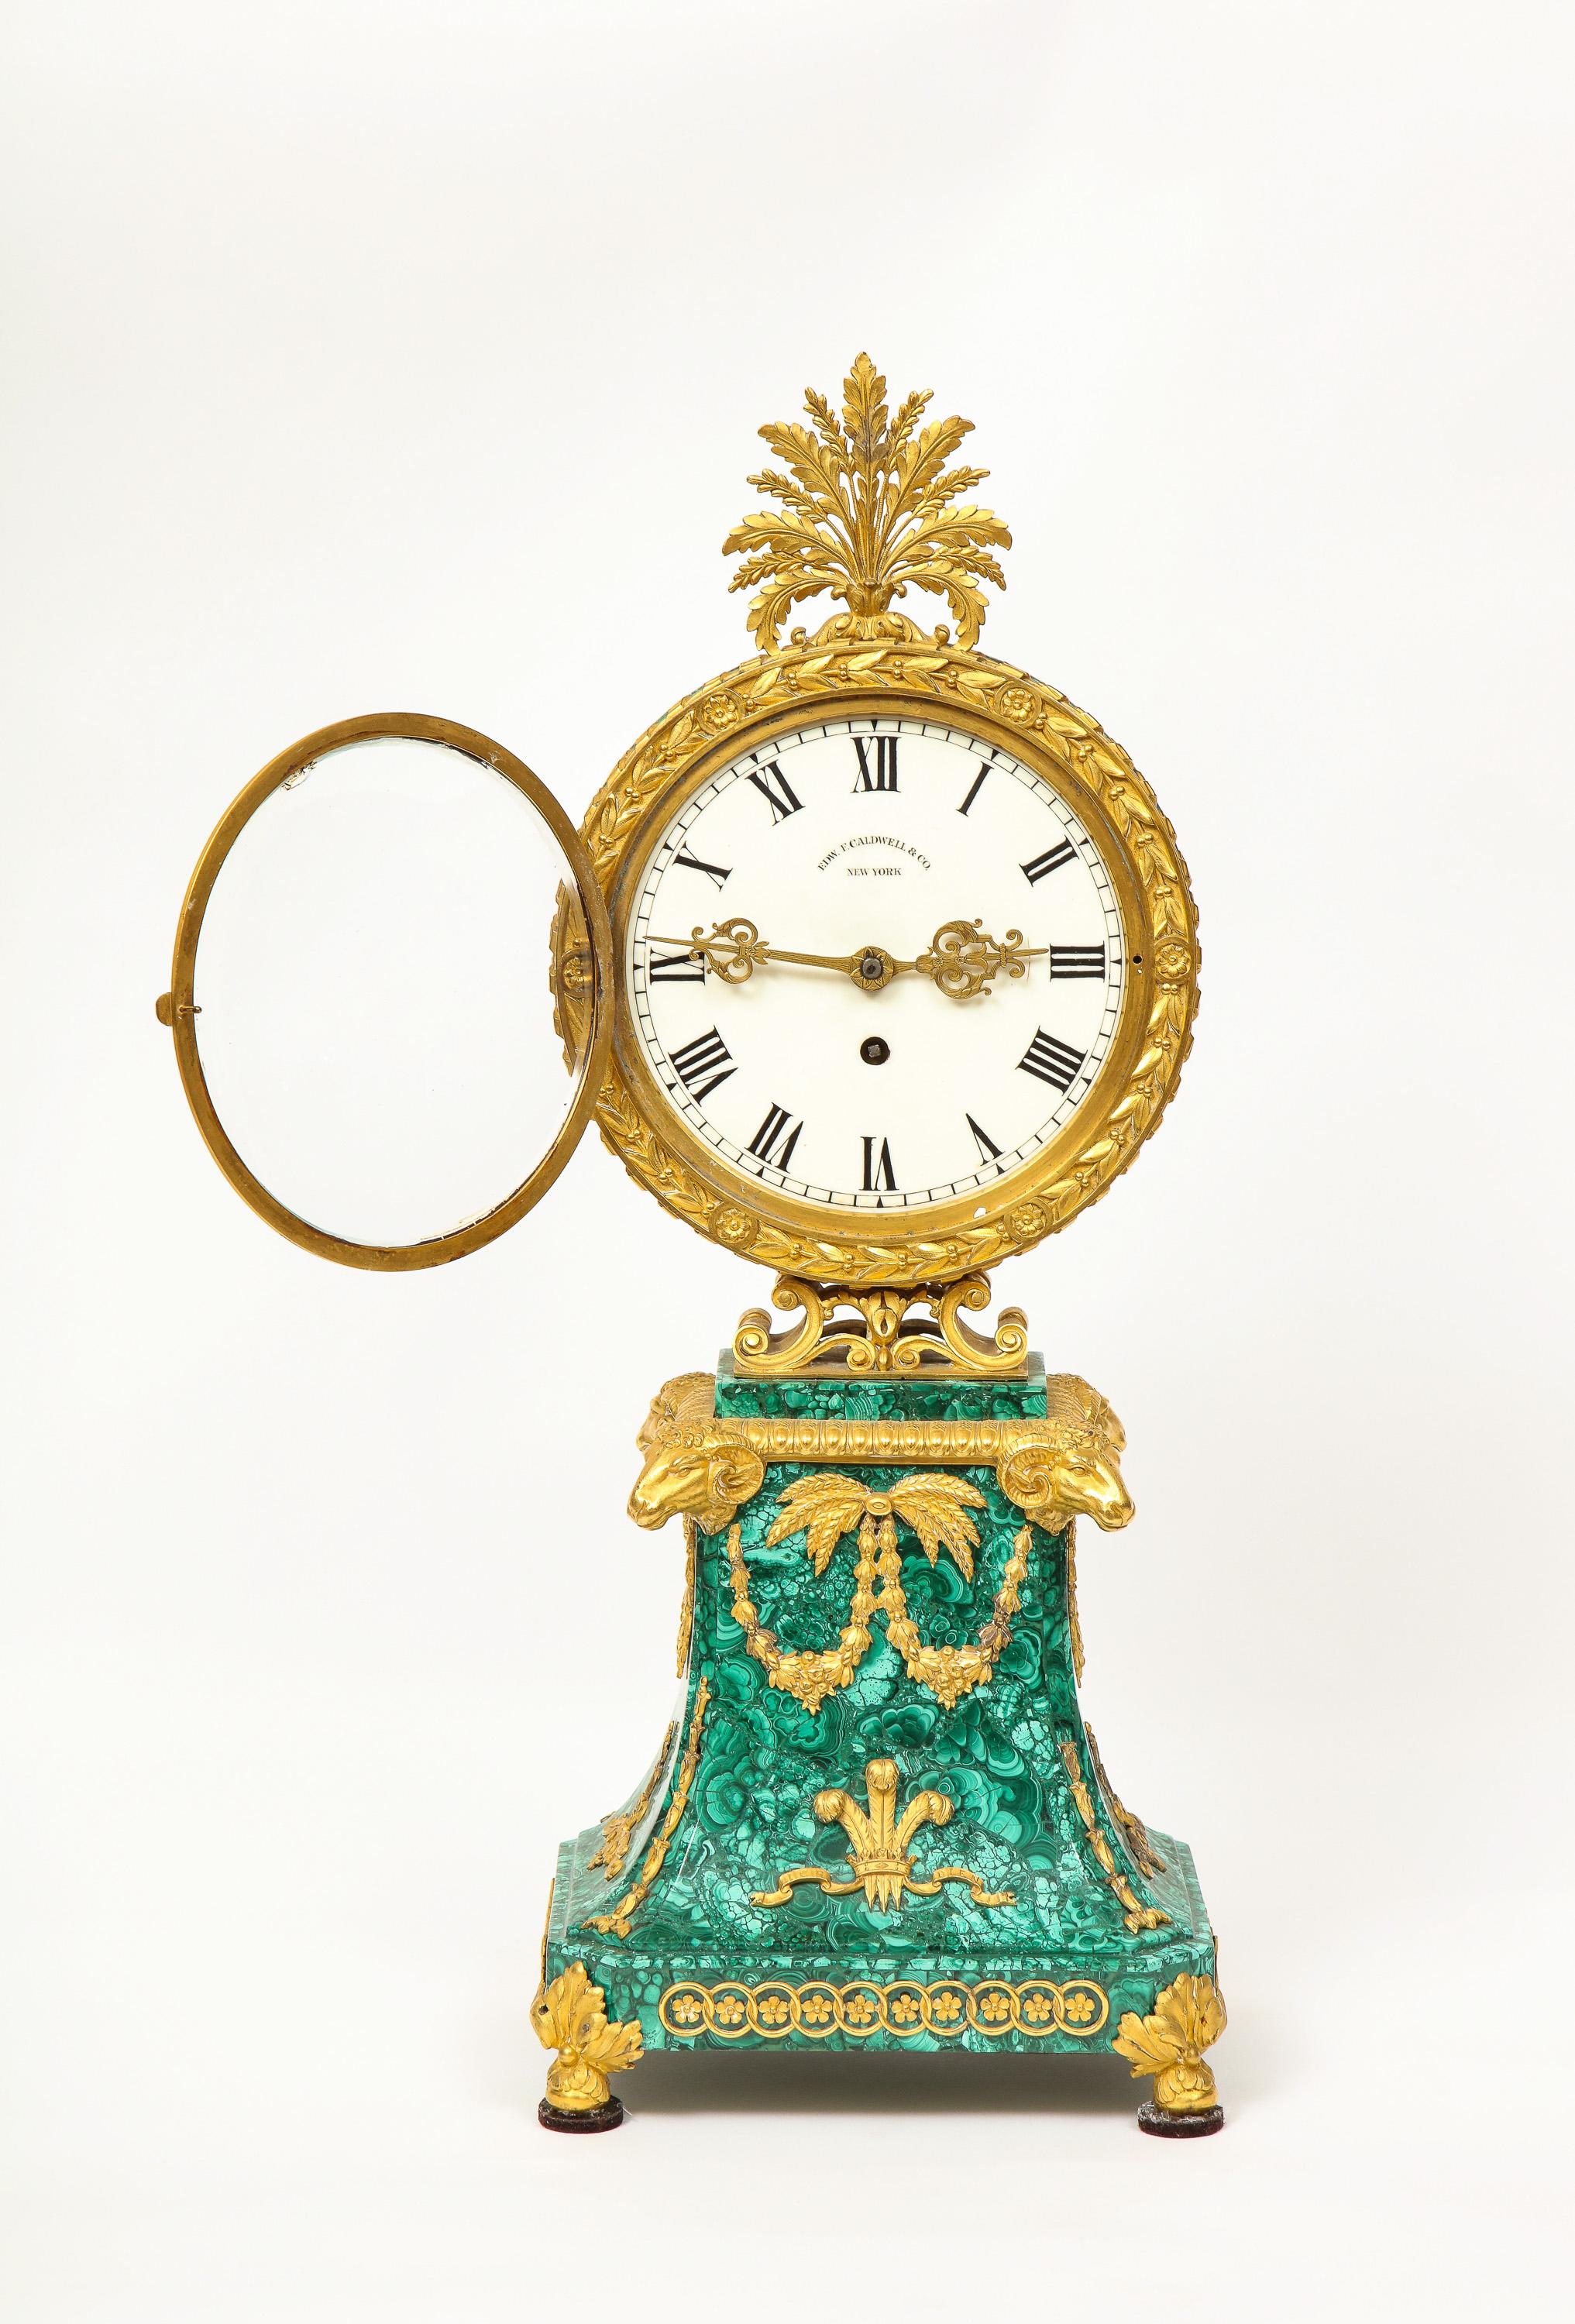 Edward F. Caldwell and Co., An extremely fine and rare American ormolu-mounted malachite clock with the prince of wales's feathers, circa early 20th century

The shape, design, and quality of this clock definitely shows that this was privately